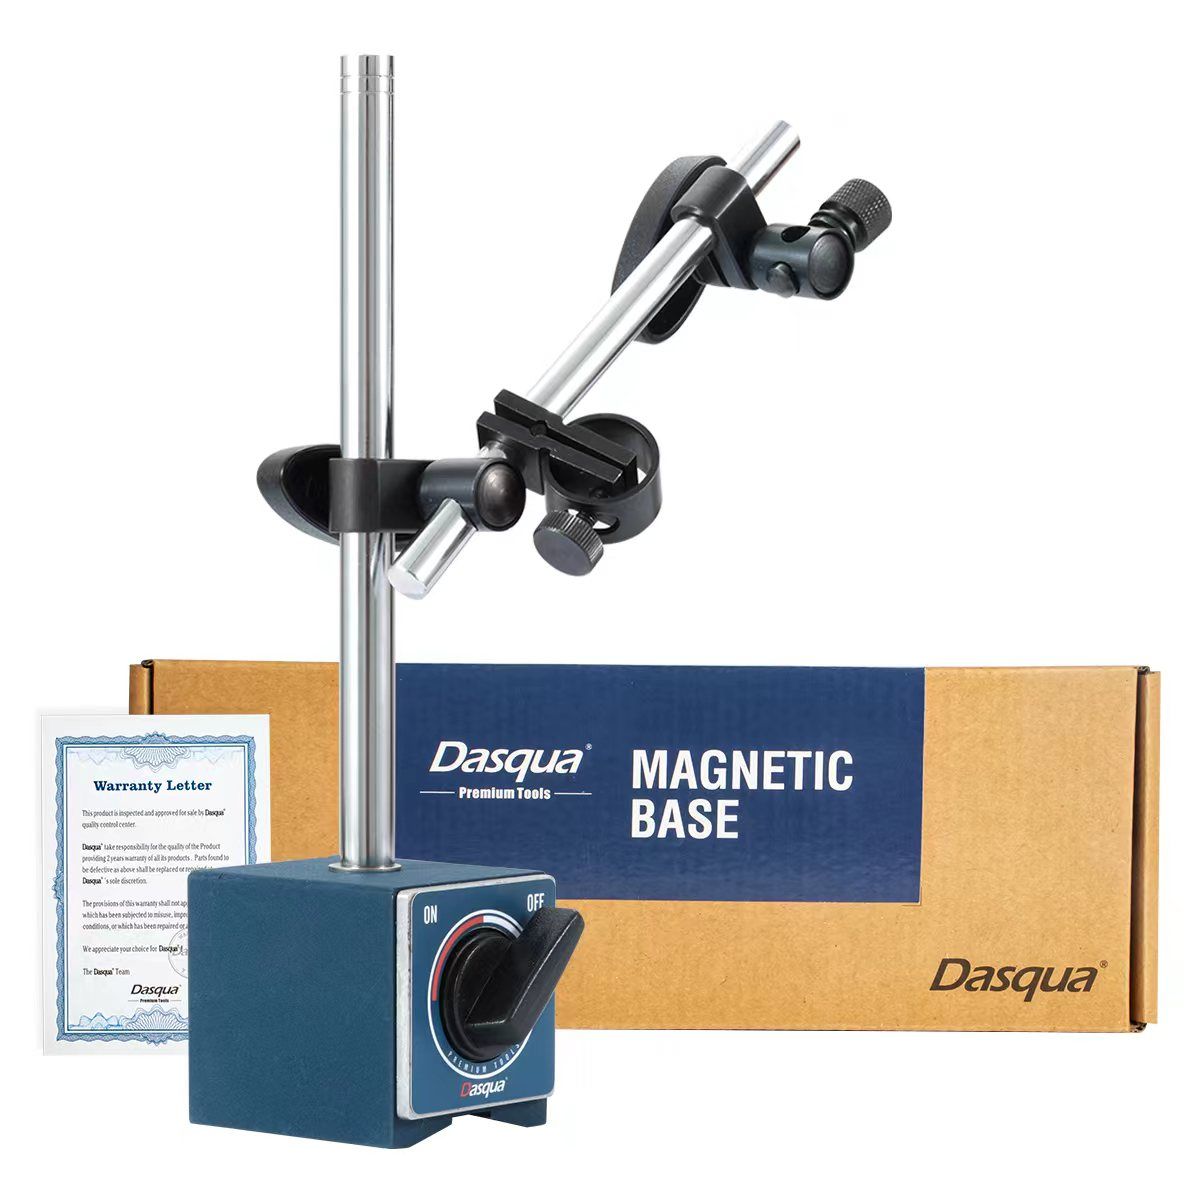 DASQUA 132 LBS MAGNETIC FORCE MAGNETIC BASE WITH FINE ADJUSTMENT (7123-1004)